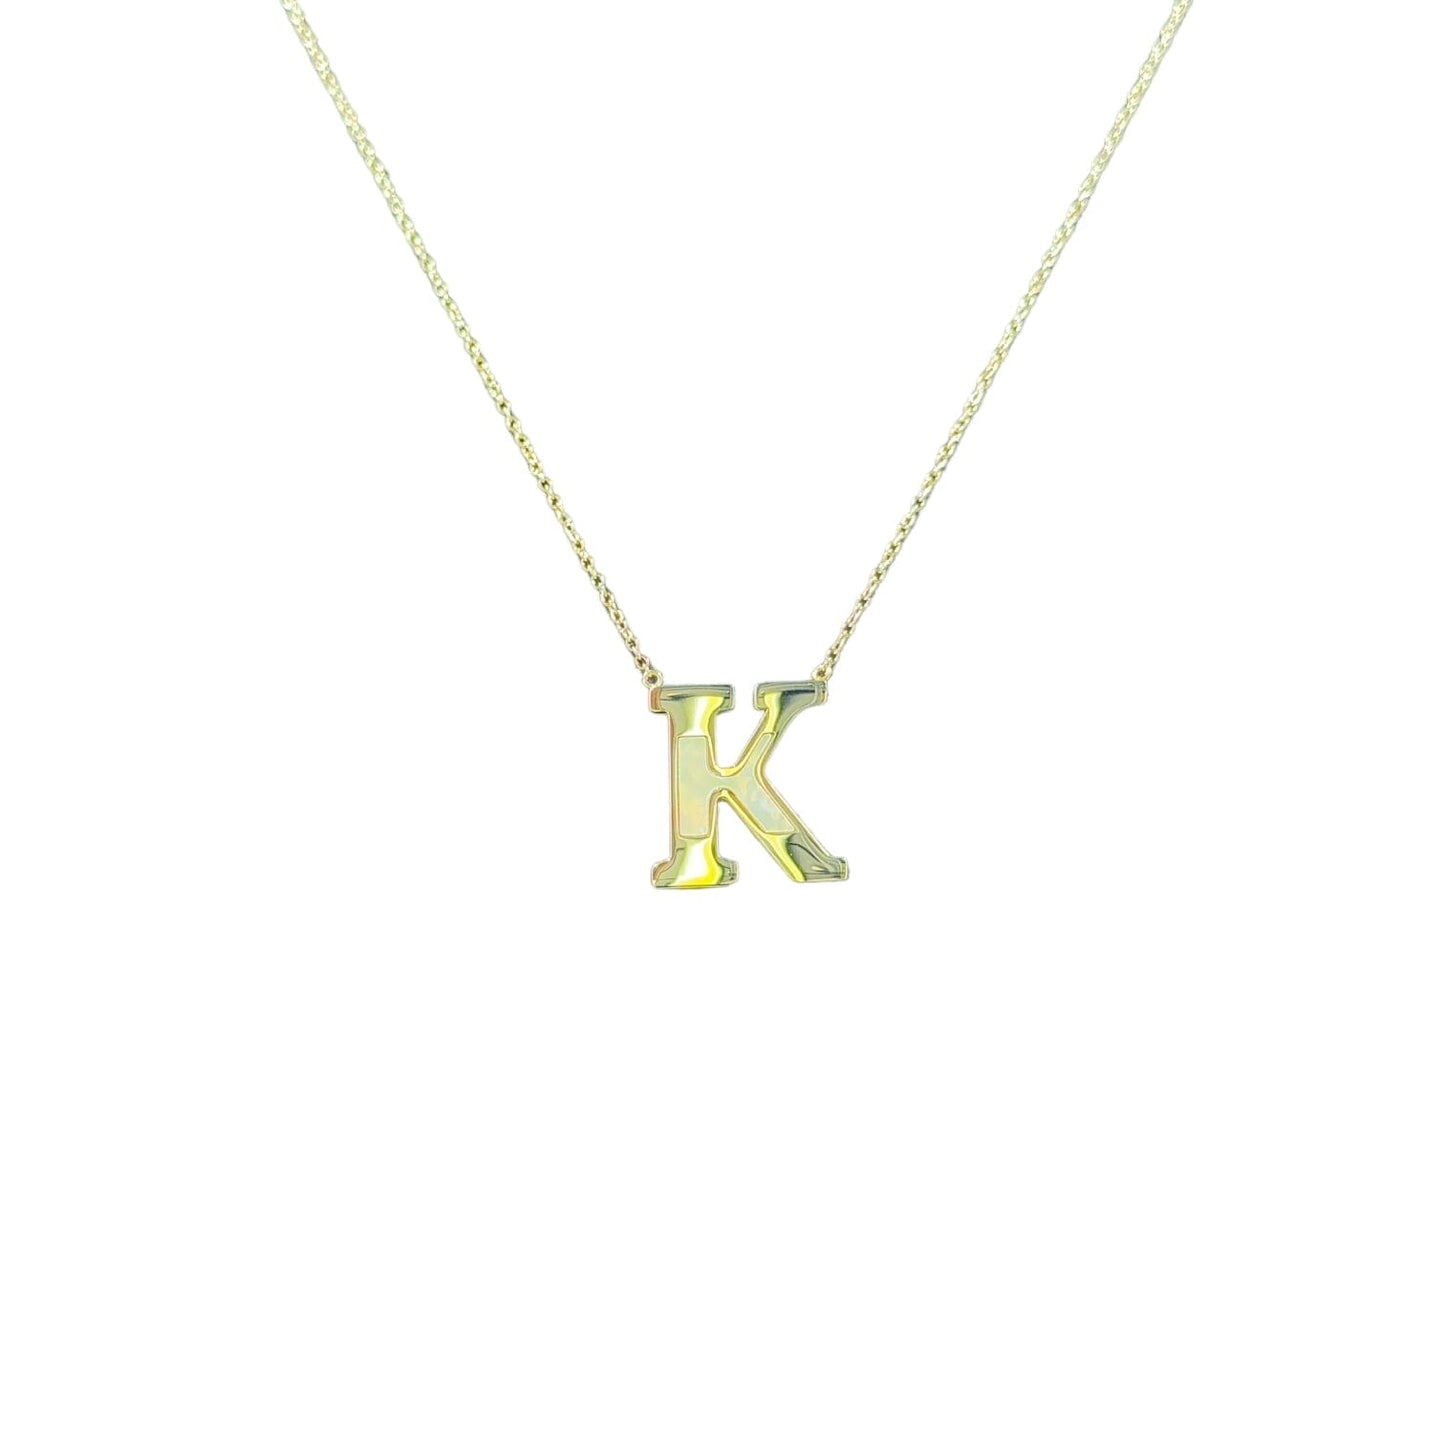 Mother of Pearl 18k Gold Initial Necklace Necklaces TRENDZIO K 